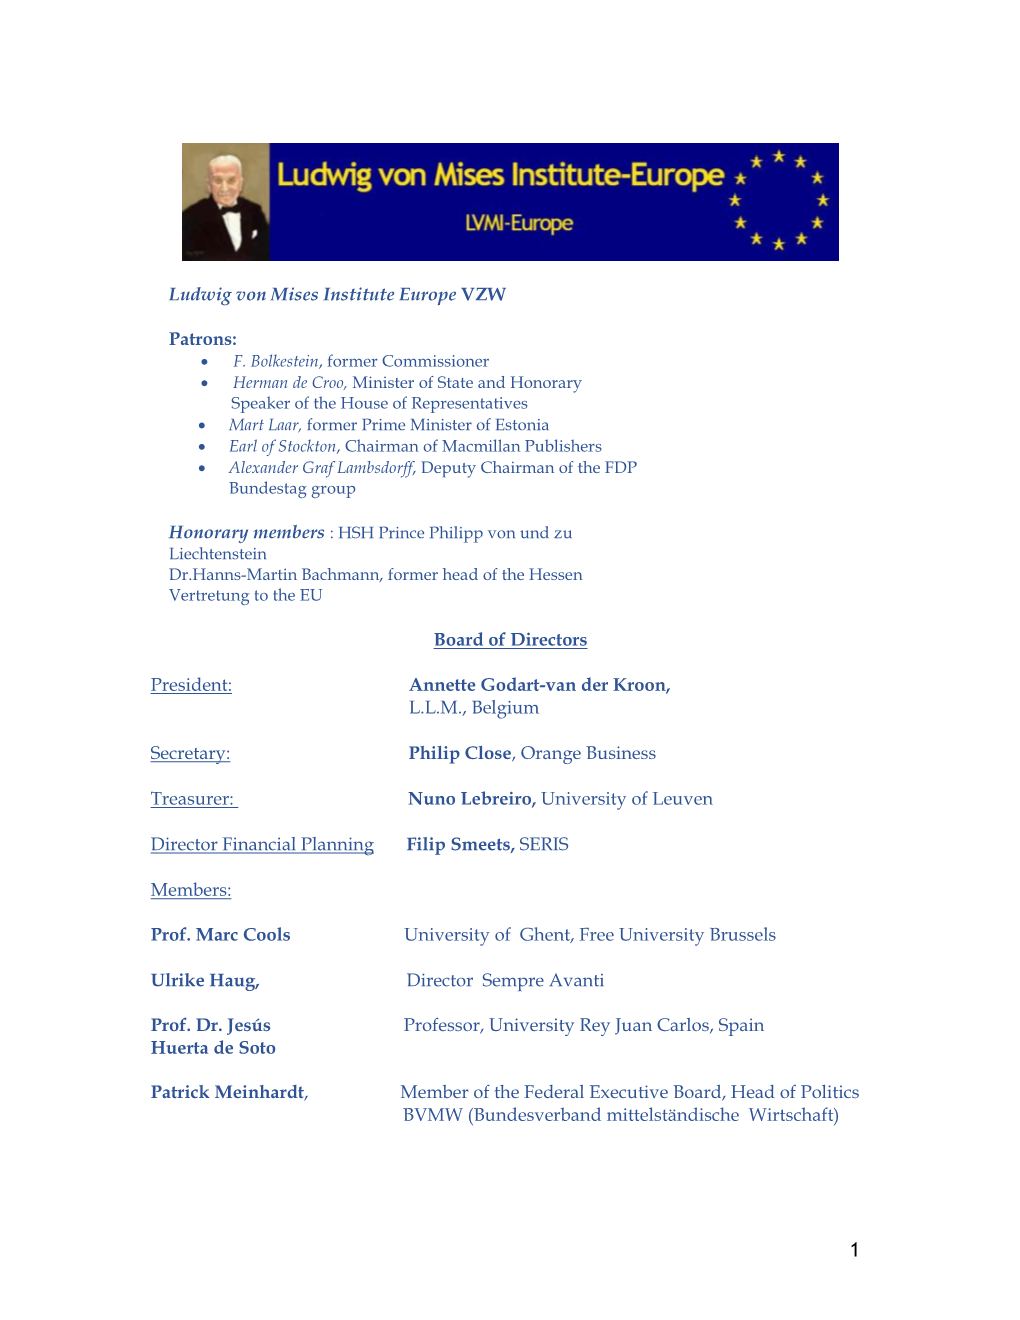 Presentation and History of LVMI Europe